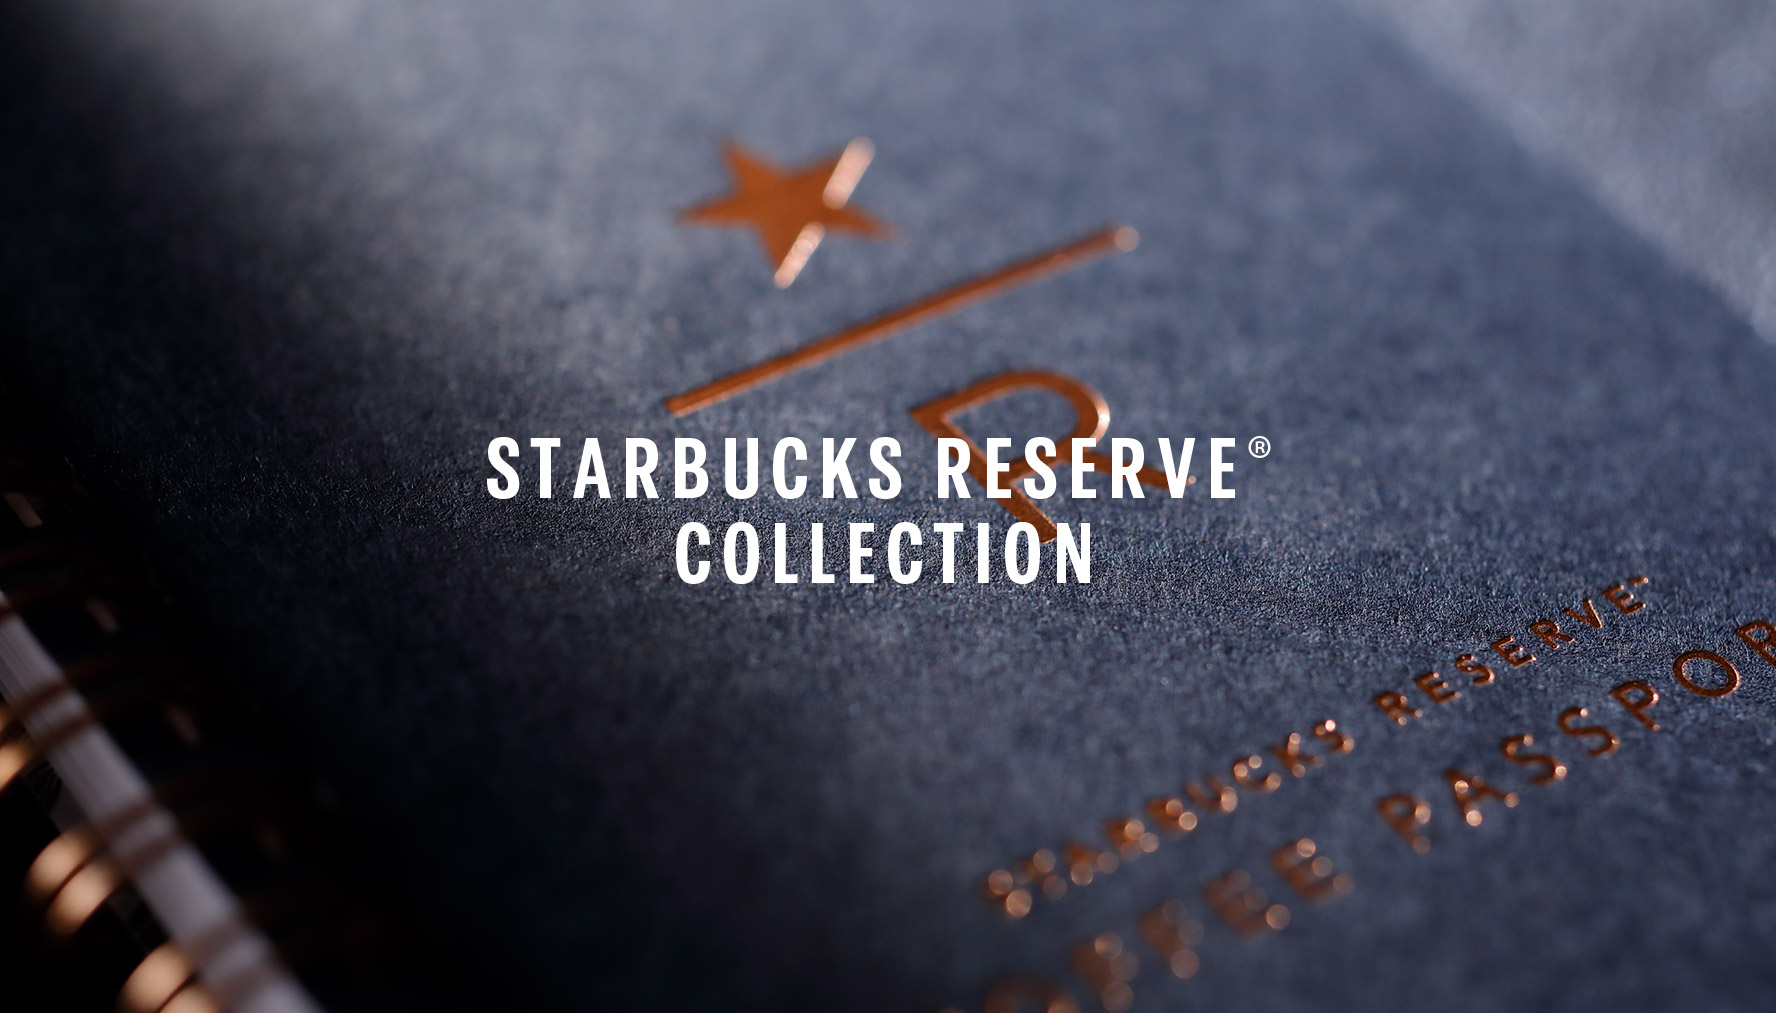 STARBUCKS RESERVE® COLLECTION